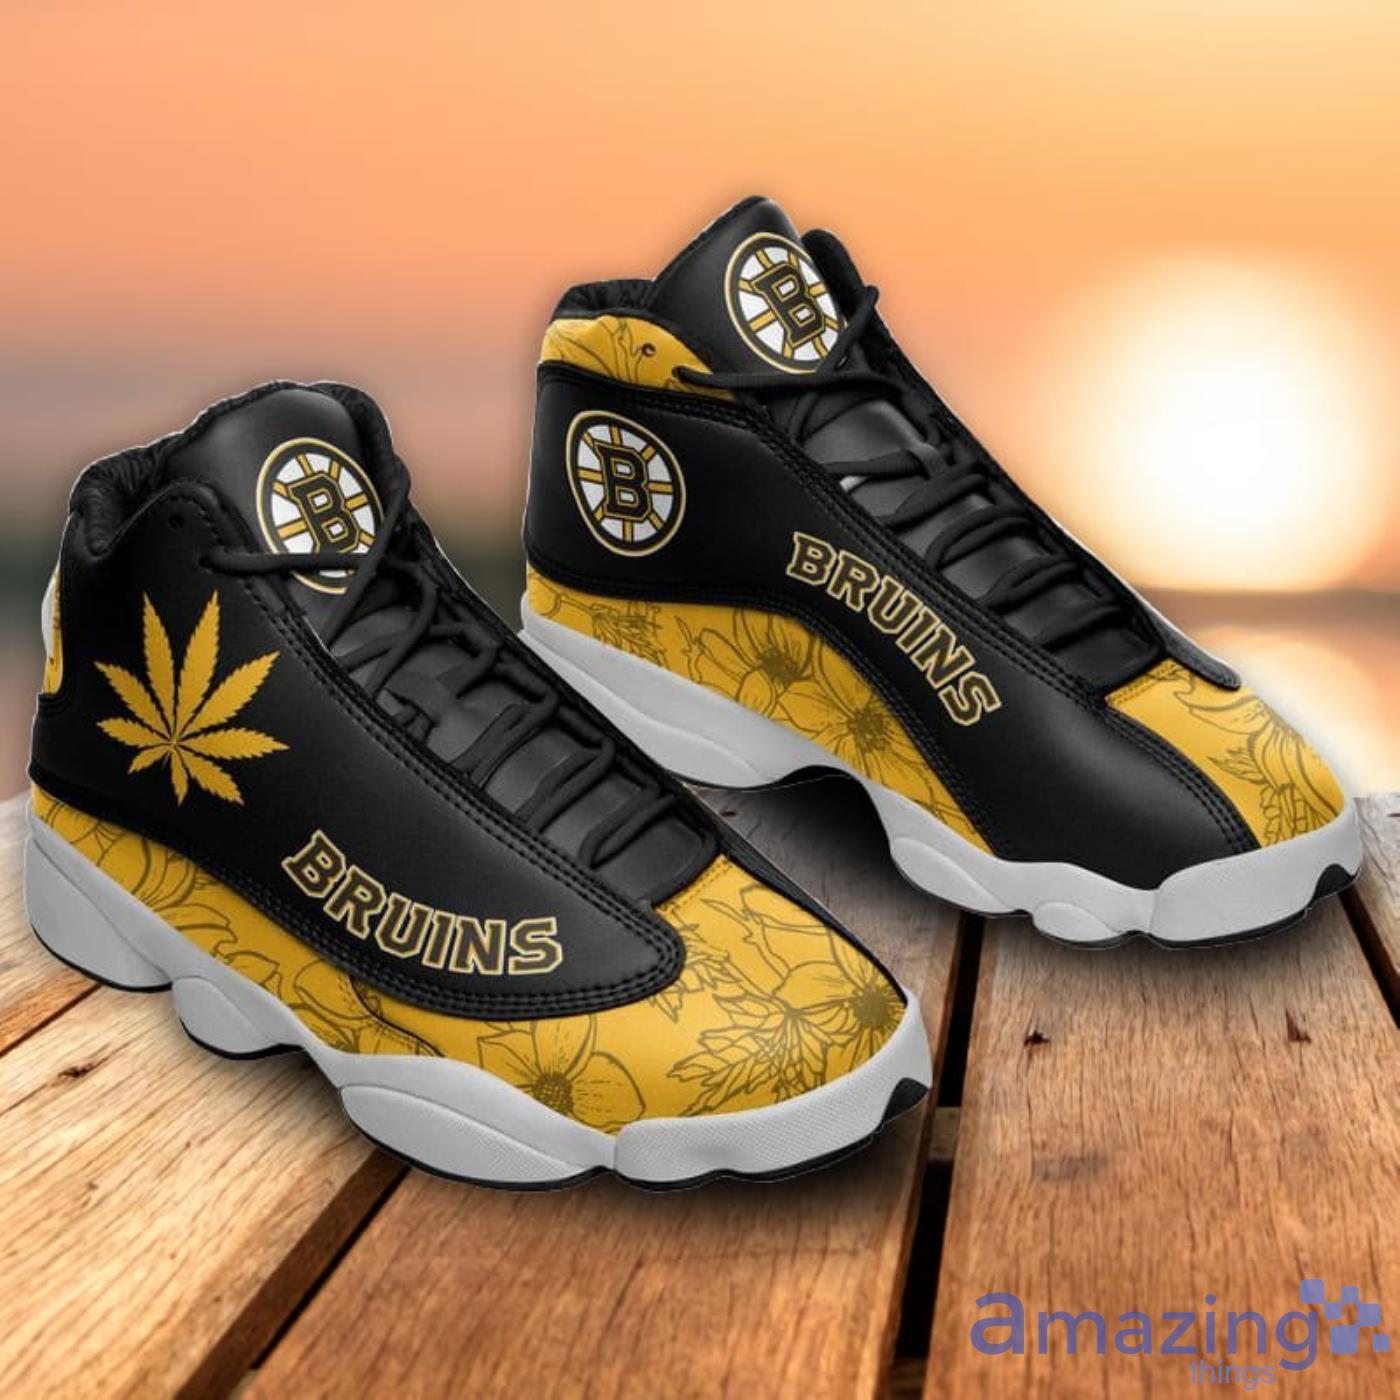 Personalized Weed Air Jordan 13 Shoes - Plangraphics